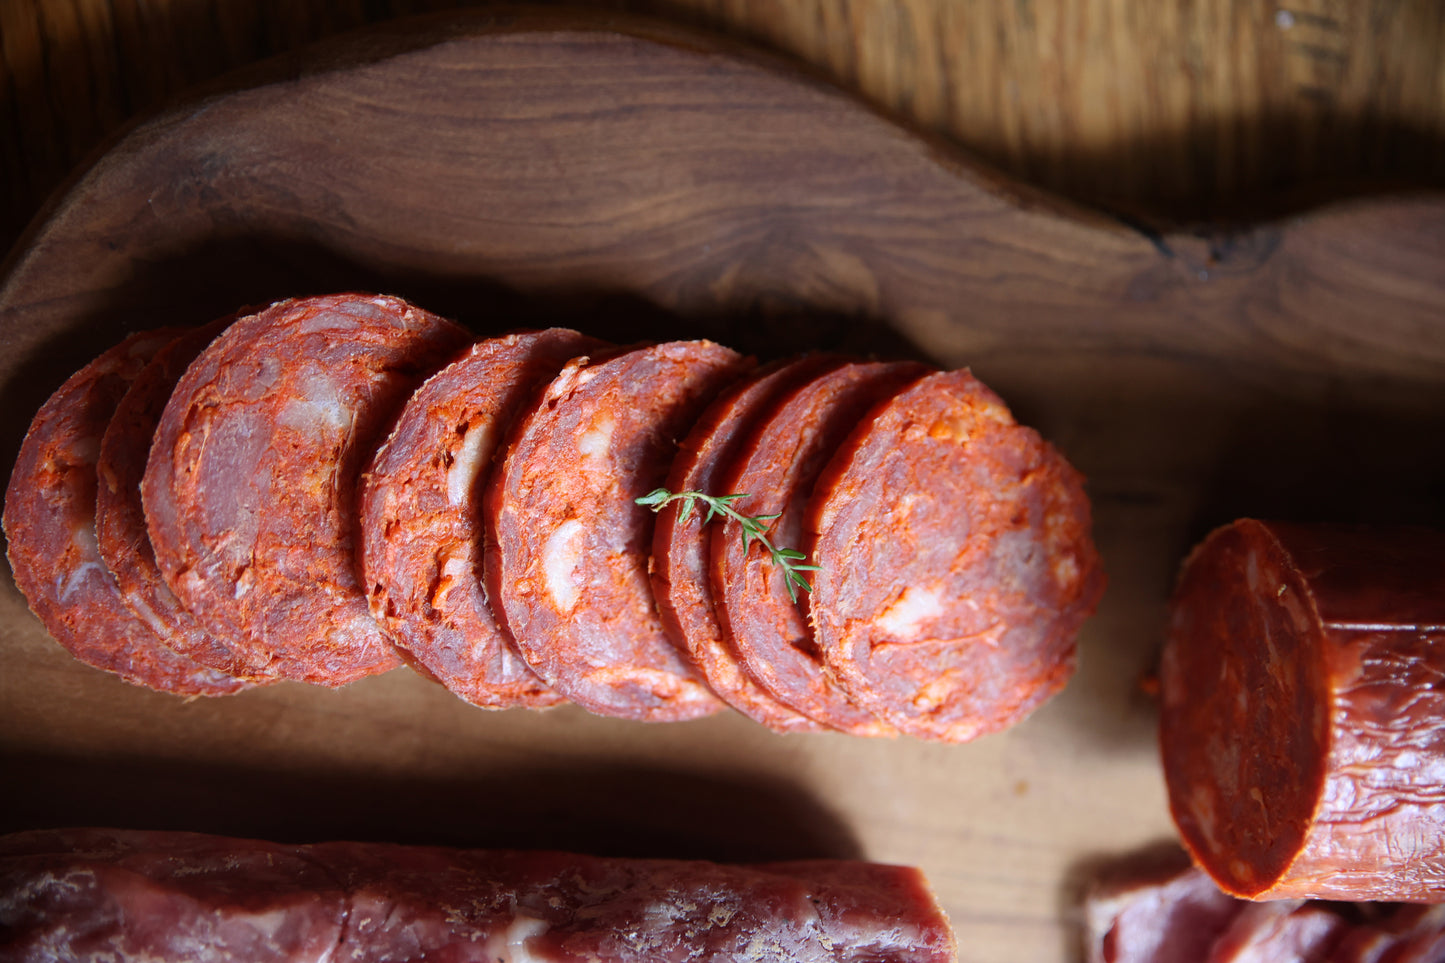 Cantimpalo Half Salami Approx 400g random weight packet. Regular price $12.50 AUD [You are guaranteed to receive at least 390g of product, equivalent price of $32.05 per kg.]